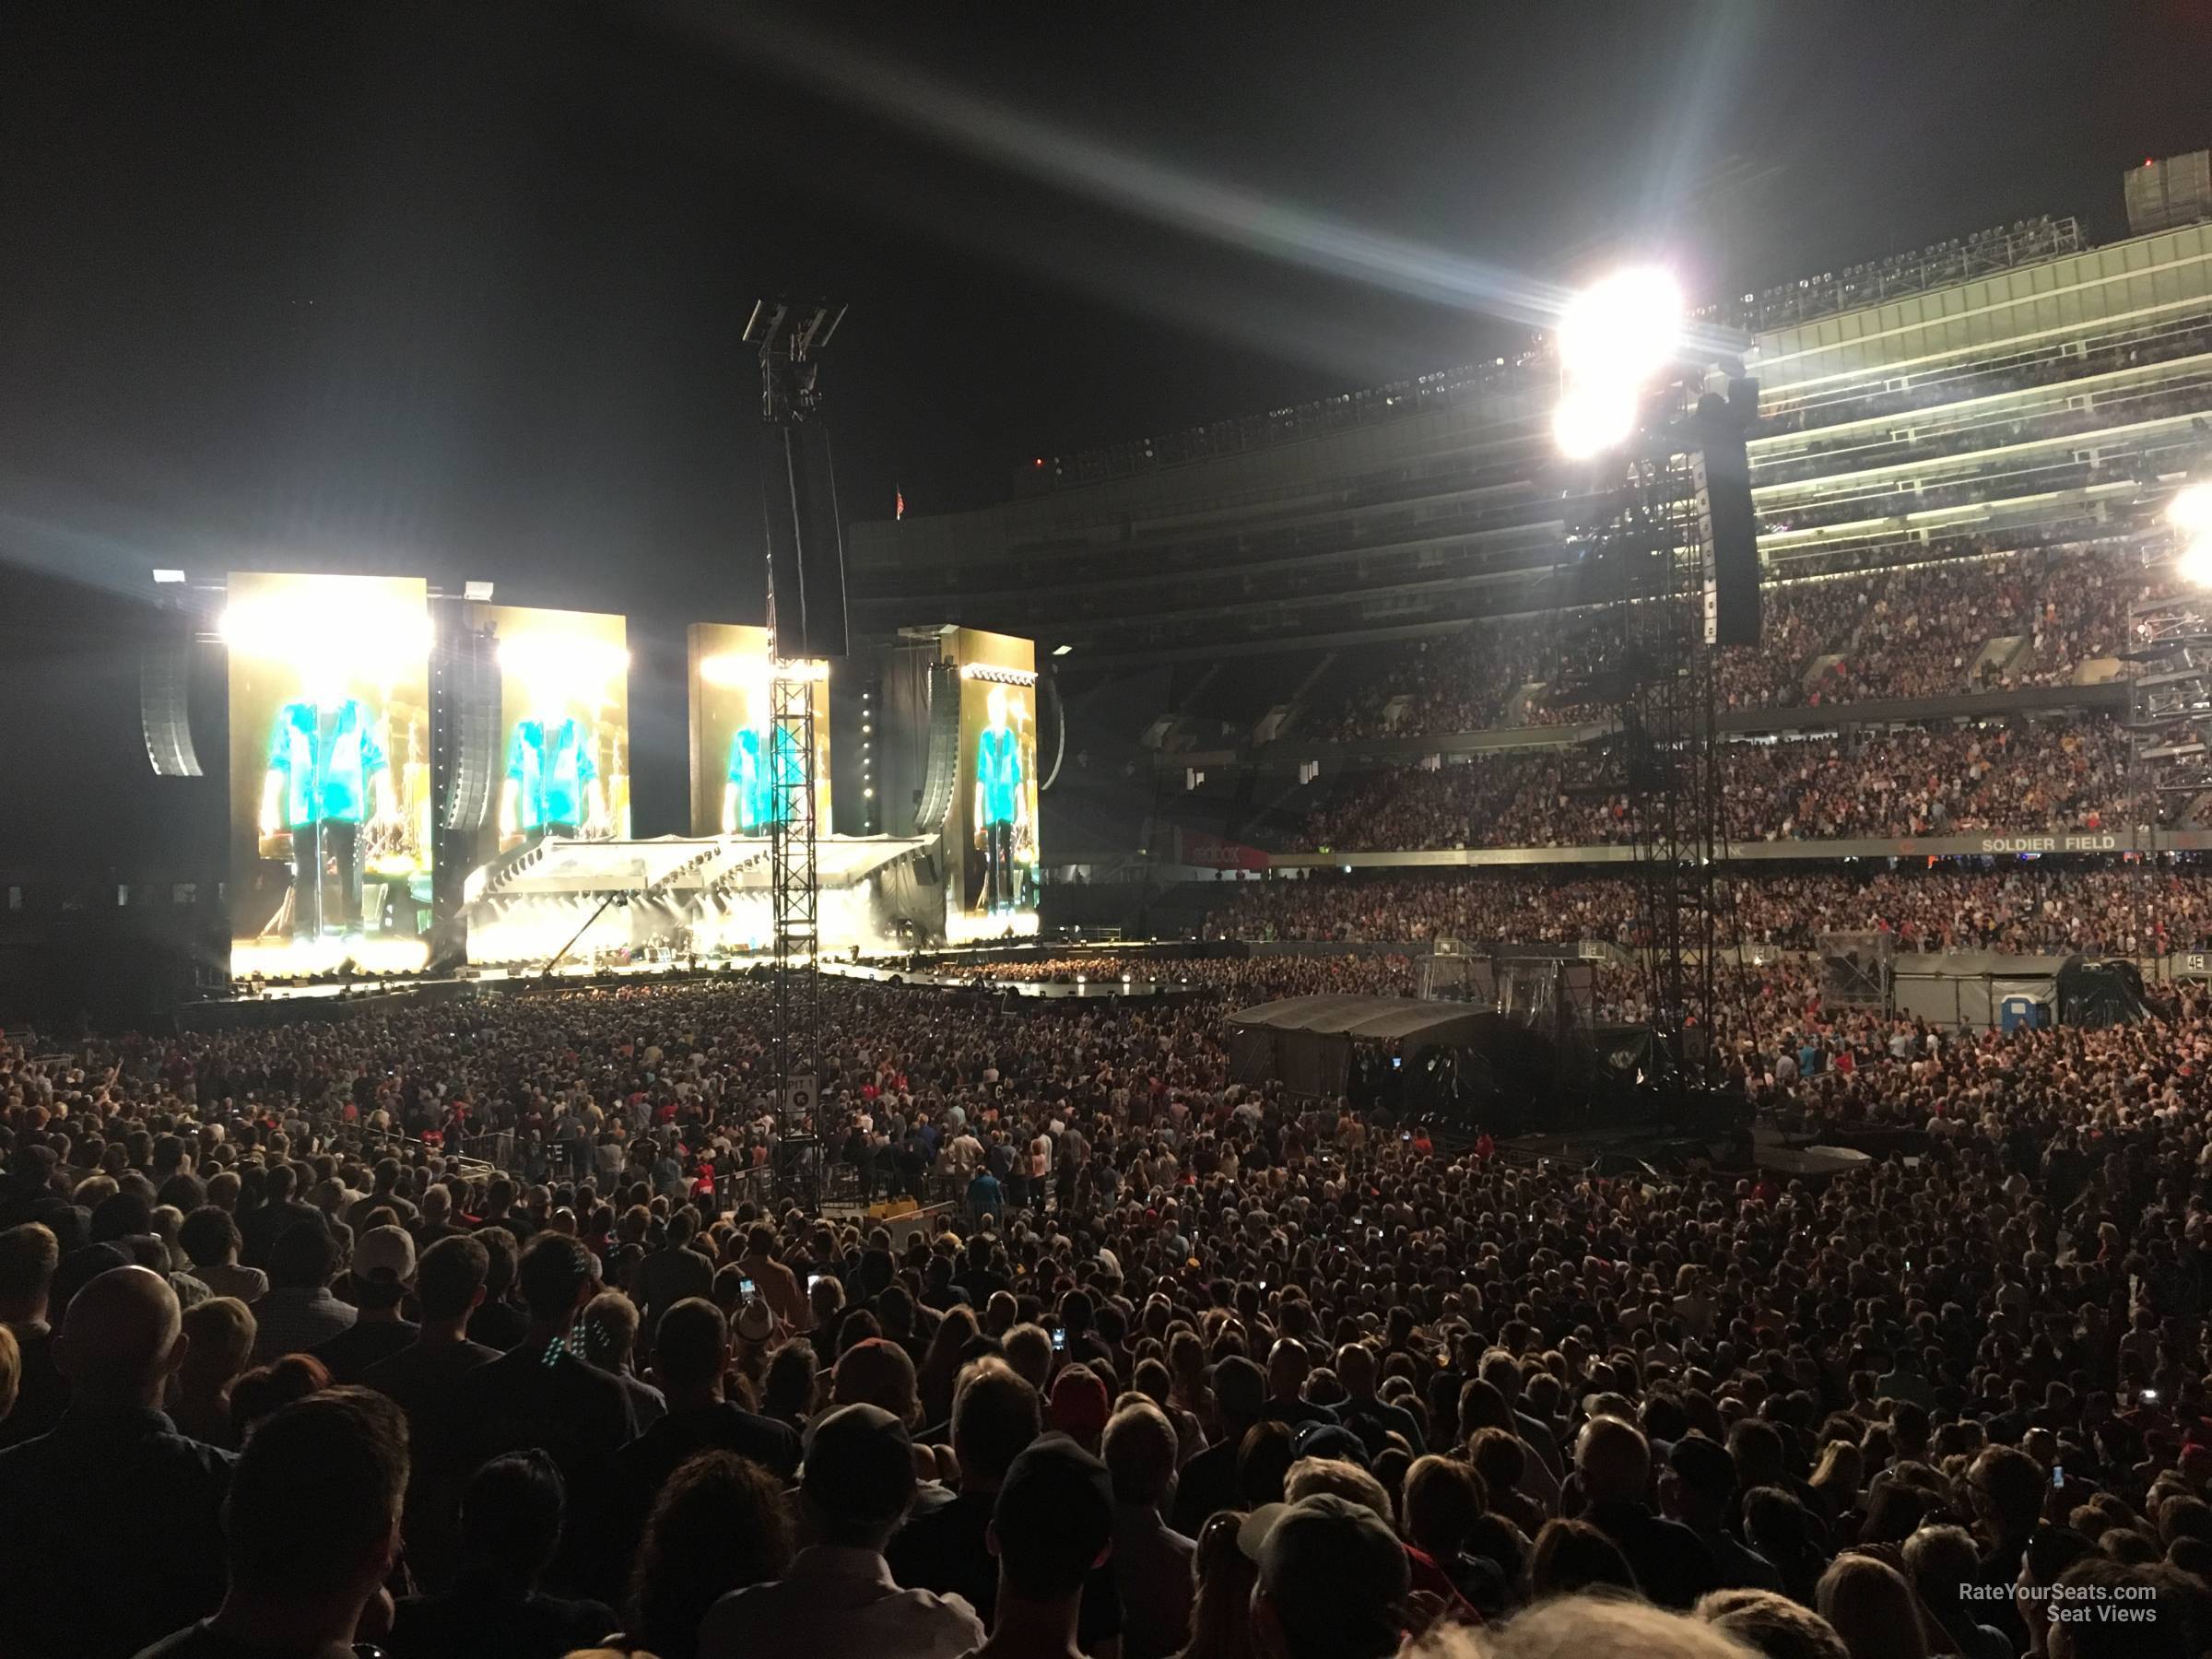 section 131, row 19 seat view  for concert - soldier field